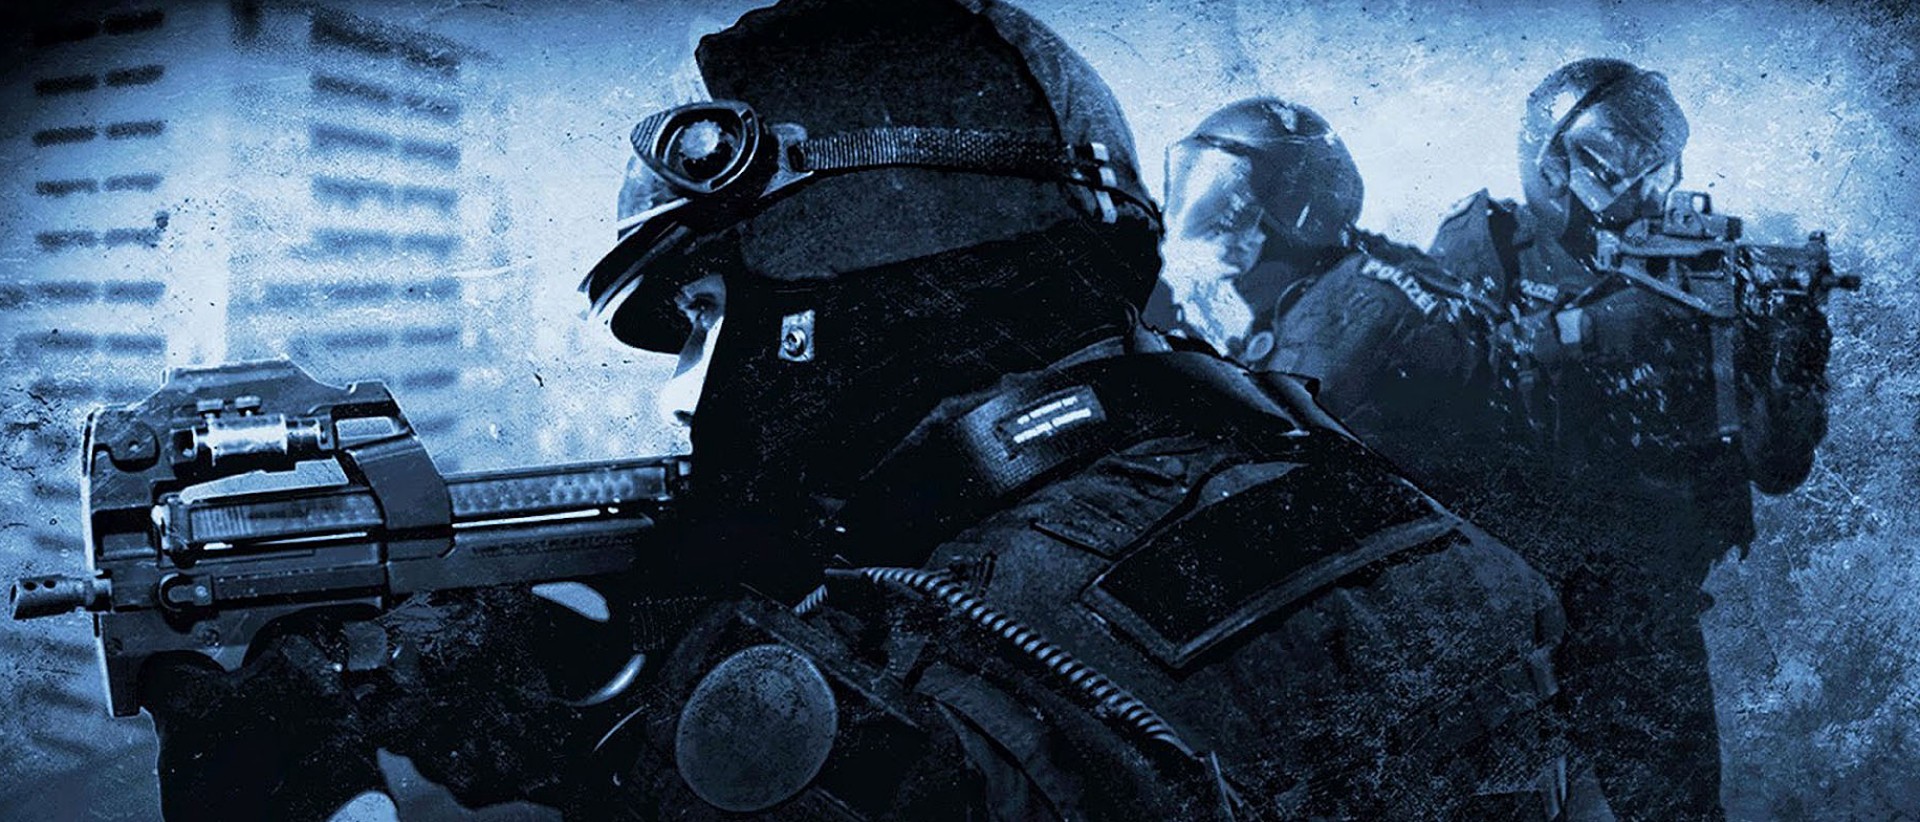 Counter-Strike: Global Offensive system requirements